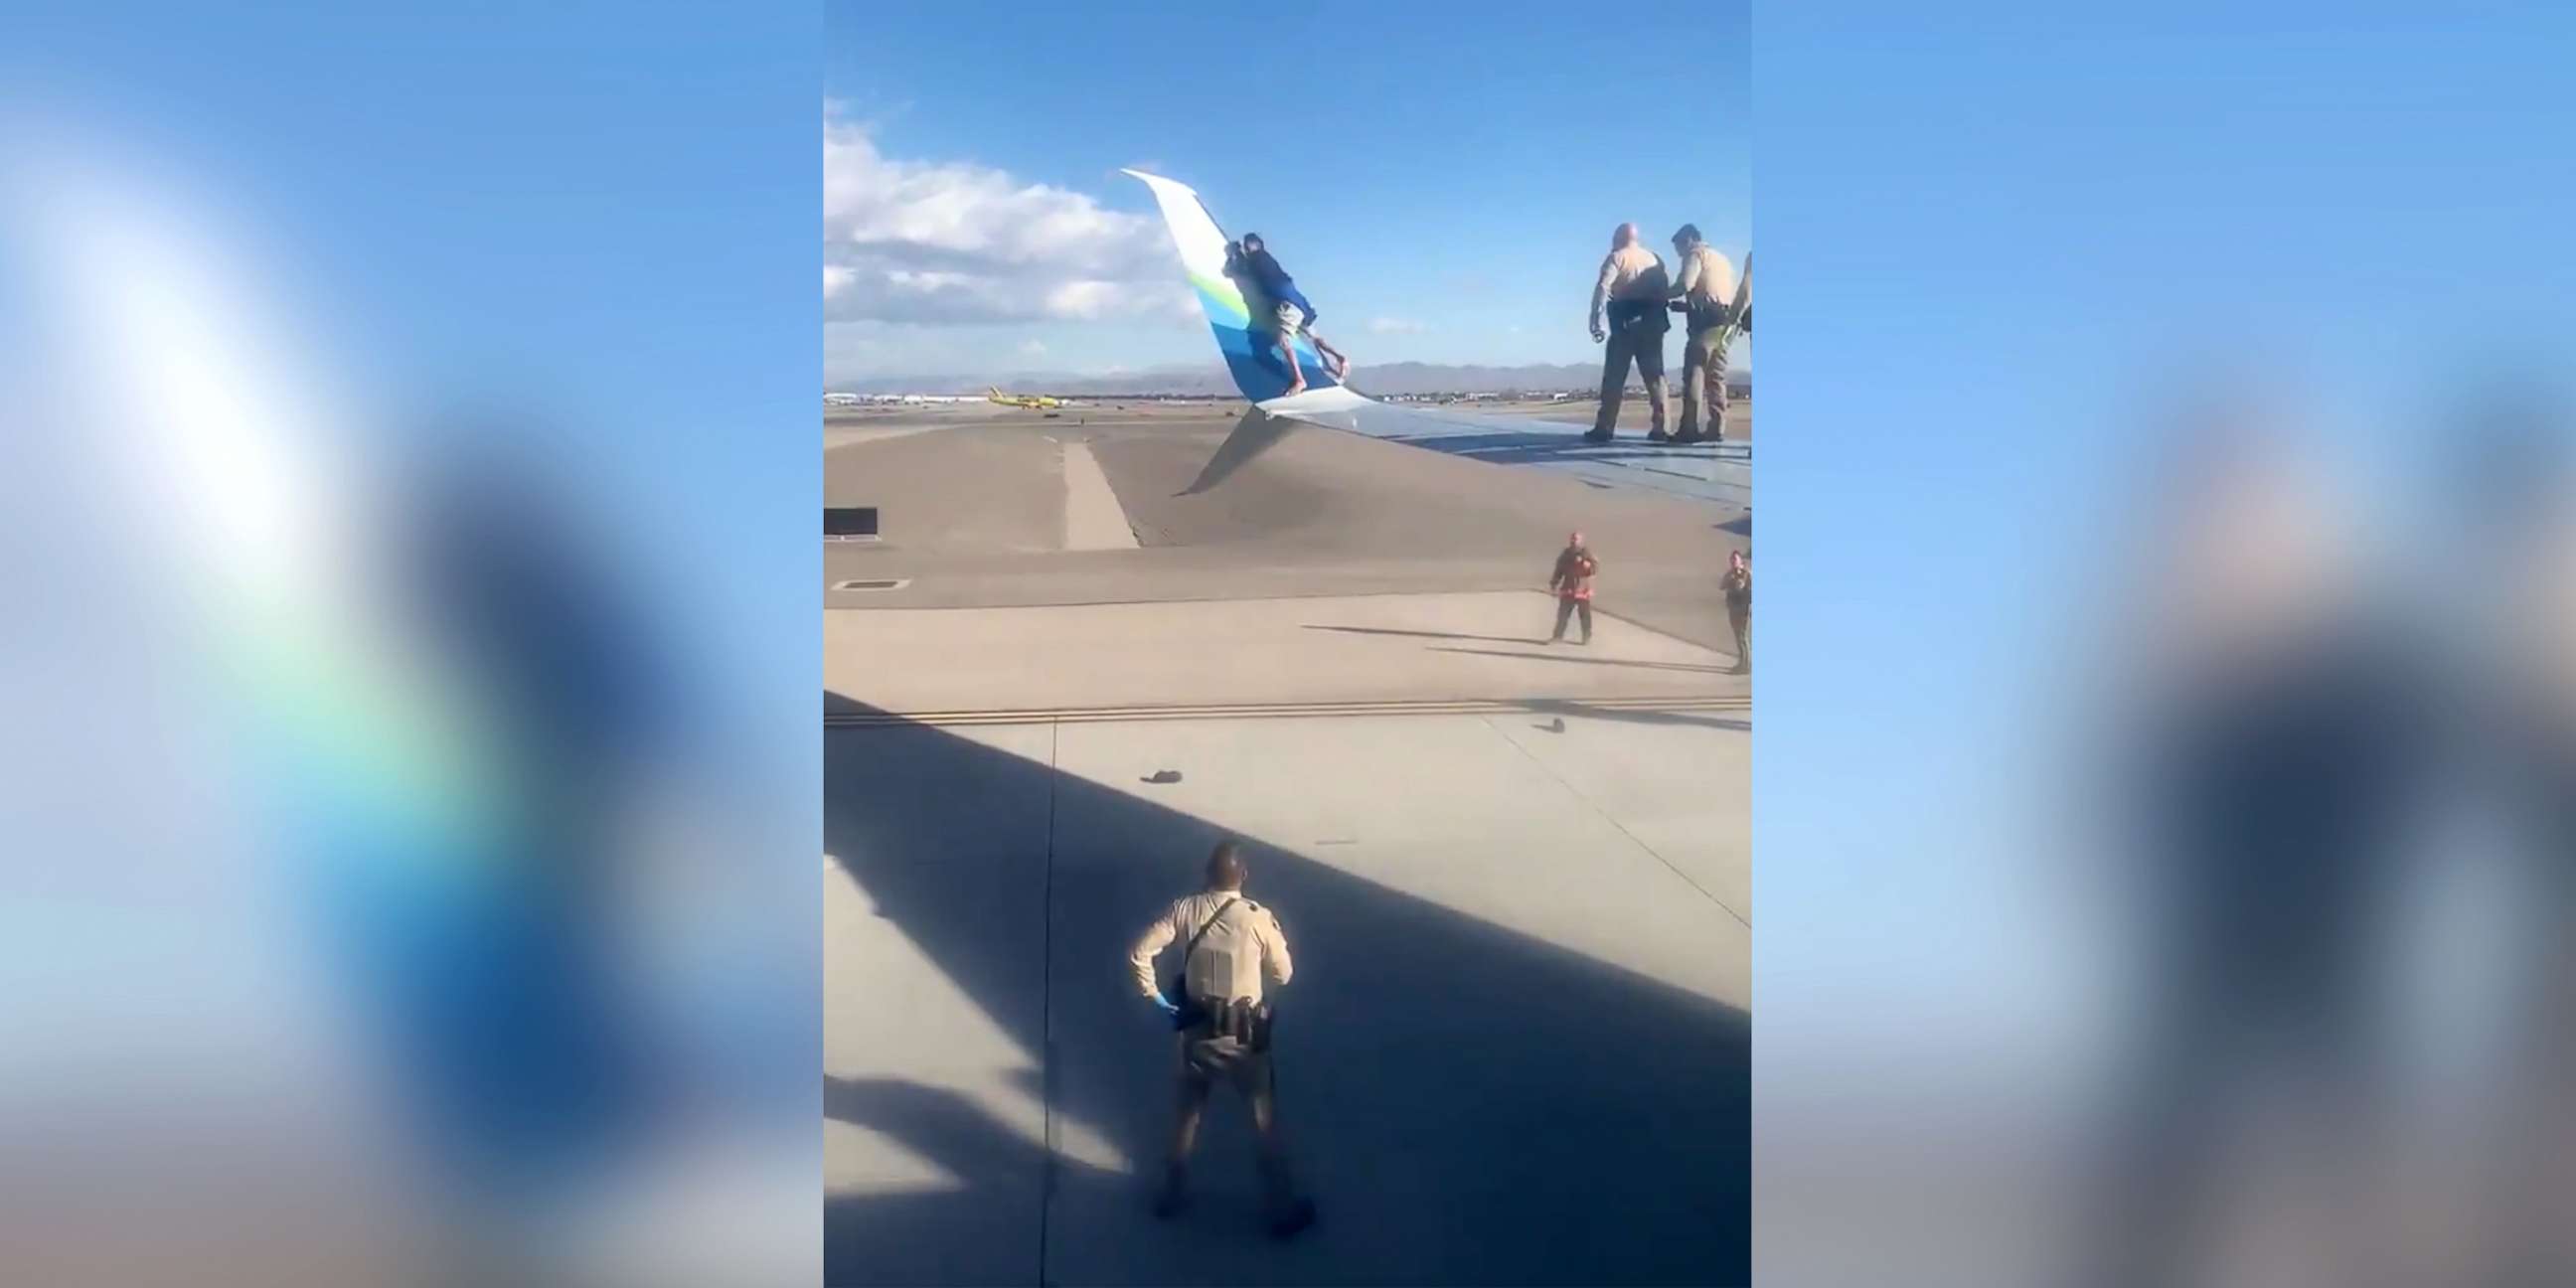 PHOTO: A suspect climbed to the wing of an airplane while it was taxiing prior to takeoff at McCarran Airport in Las Vegas, Dec. 12, 2020.